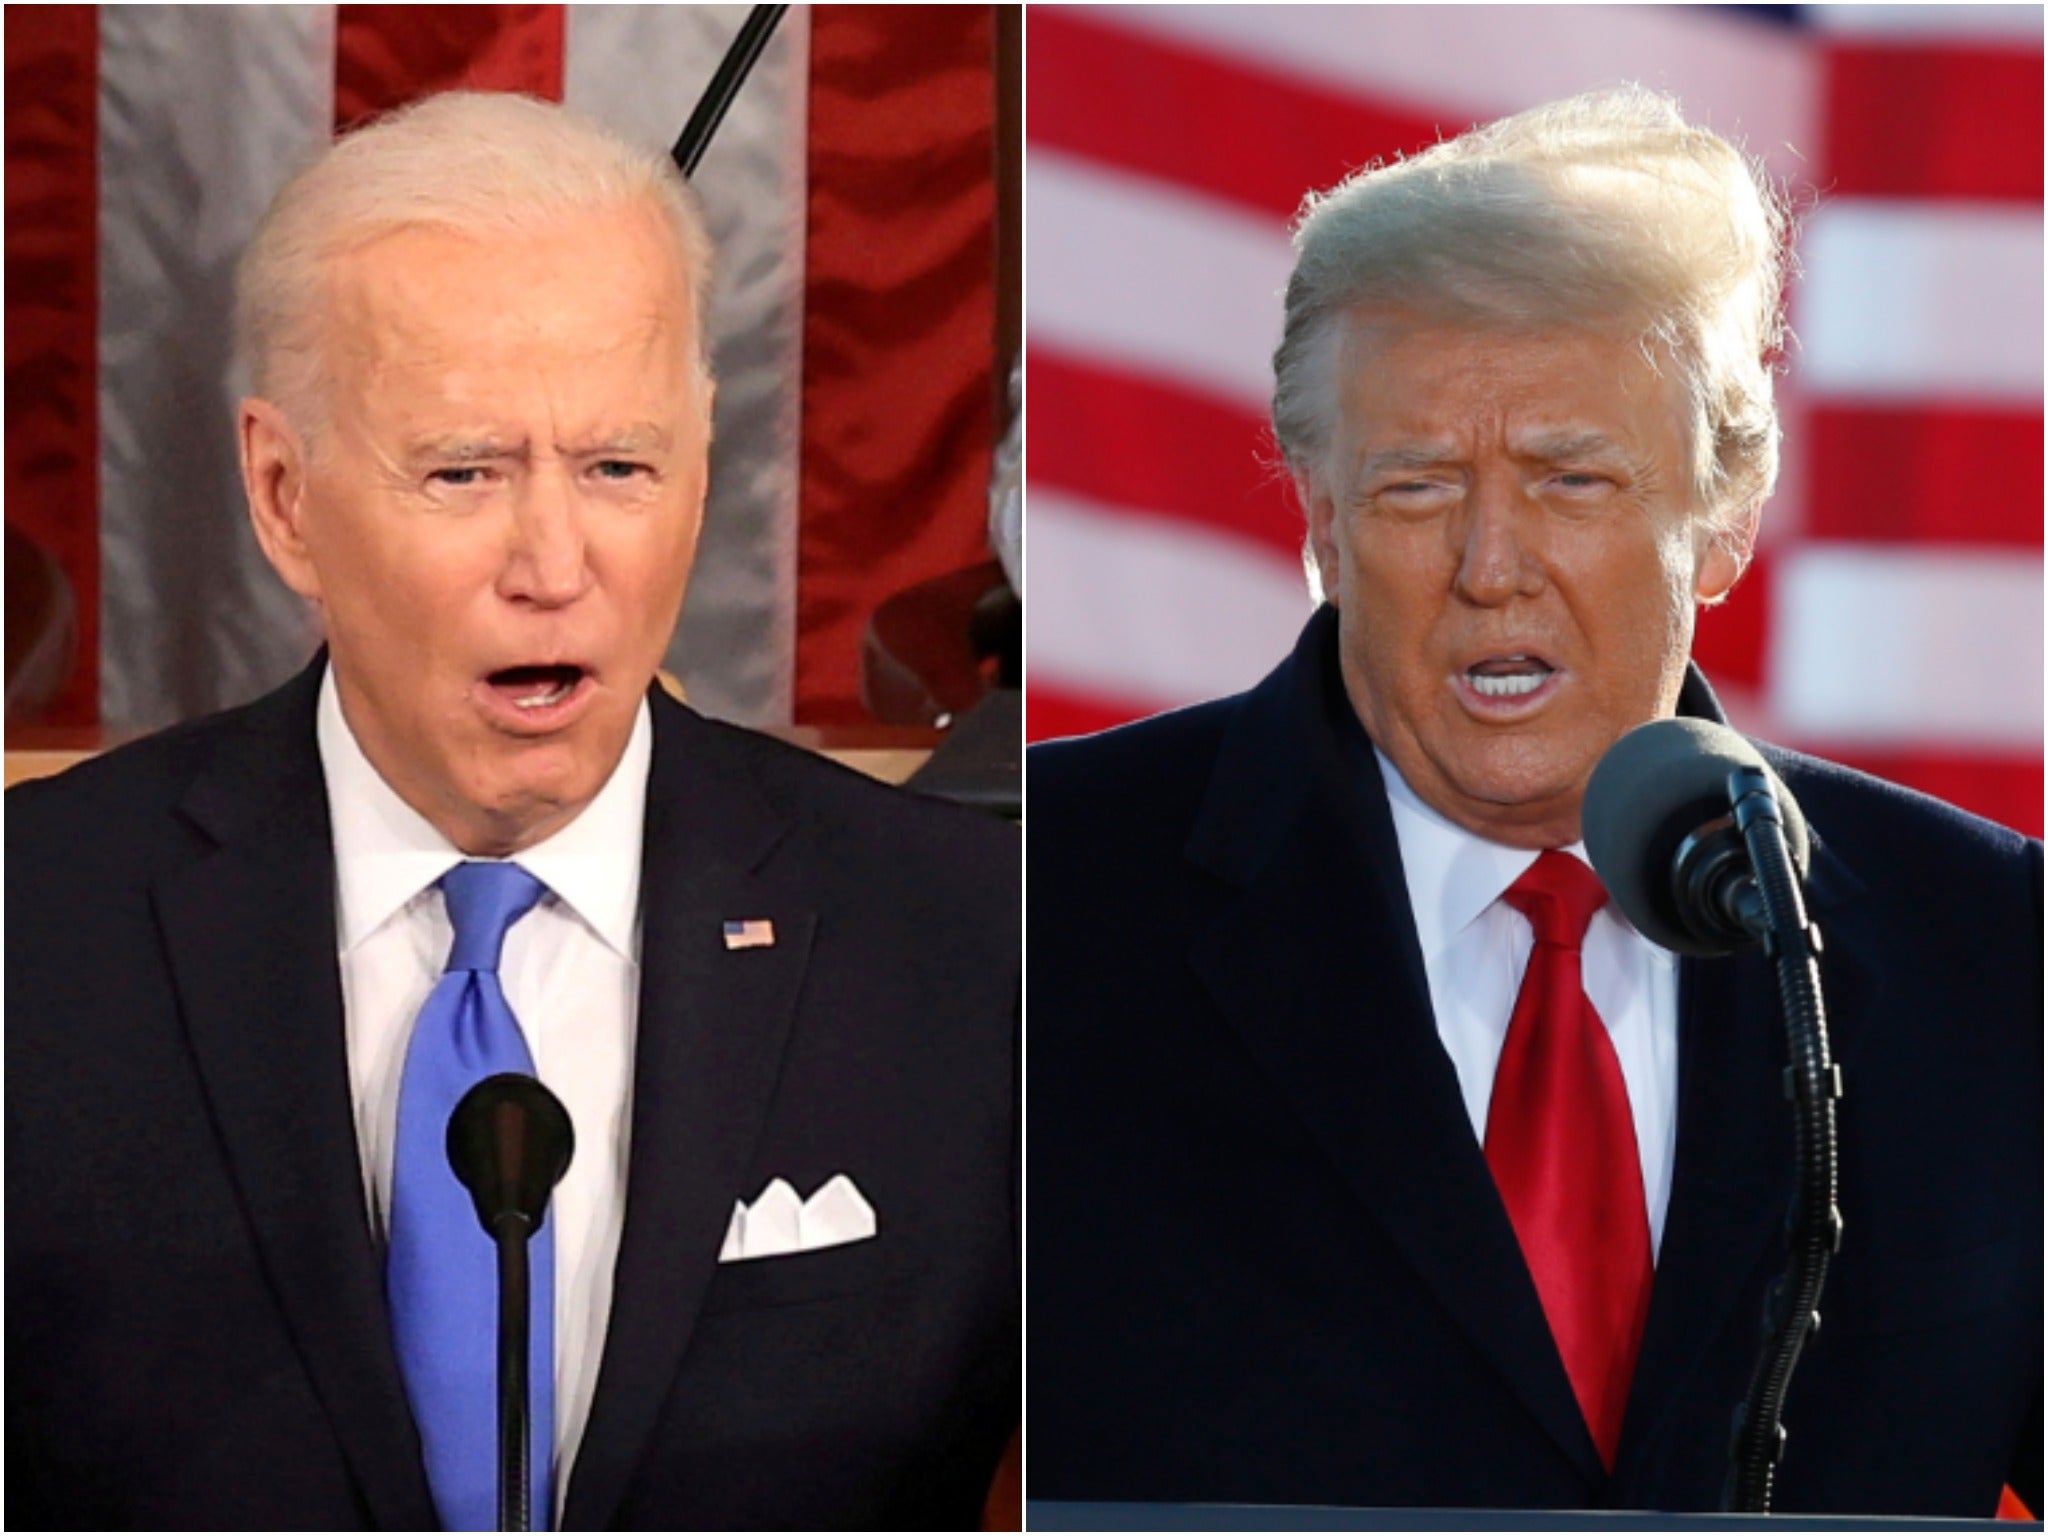 Policy searches have replaced social media searches when comparing Biden and Trump’s first 100 days